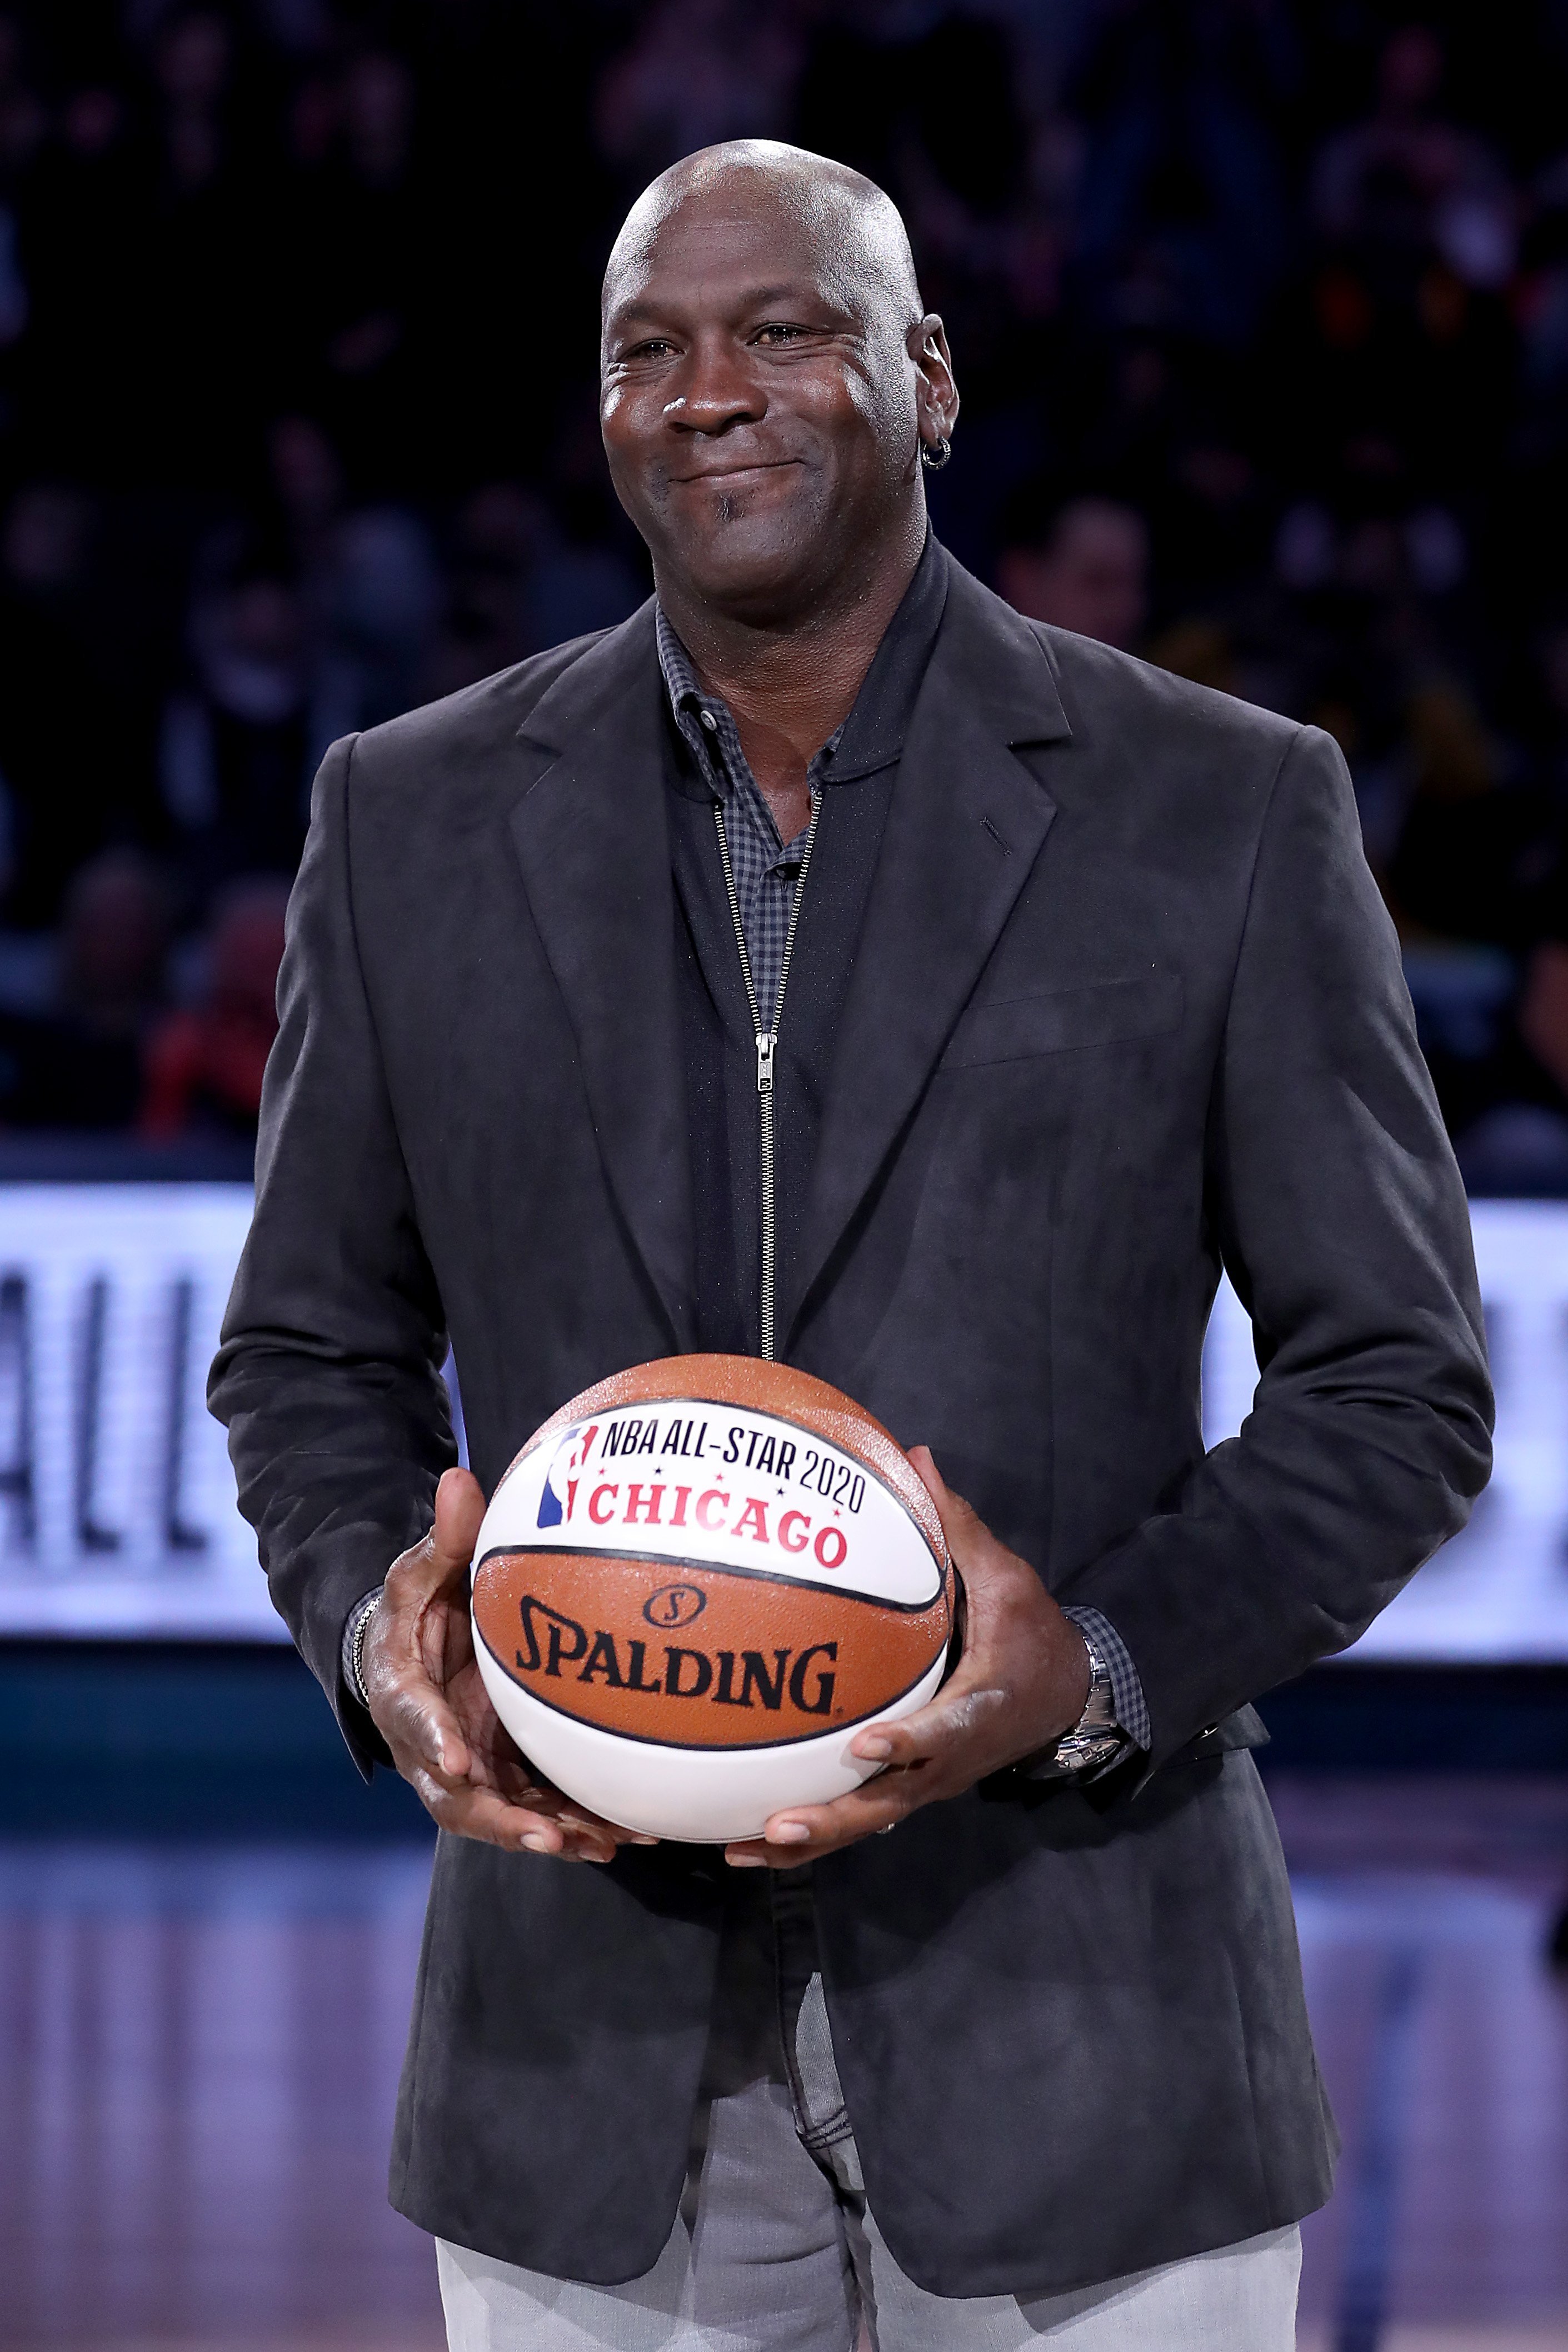 Michael Jordan takes part in a ceremony honoring the 2020 NBA All-Star game in North Carolina on Feb. 17, 2019. | Photo: Getty Images